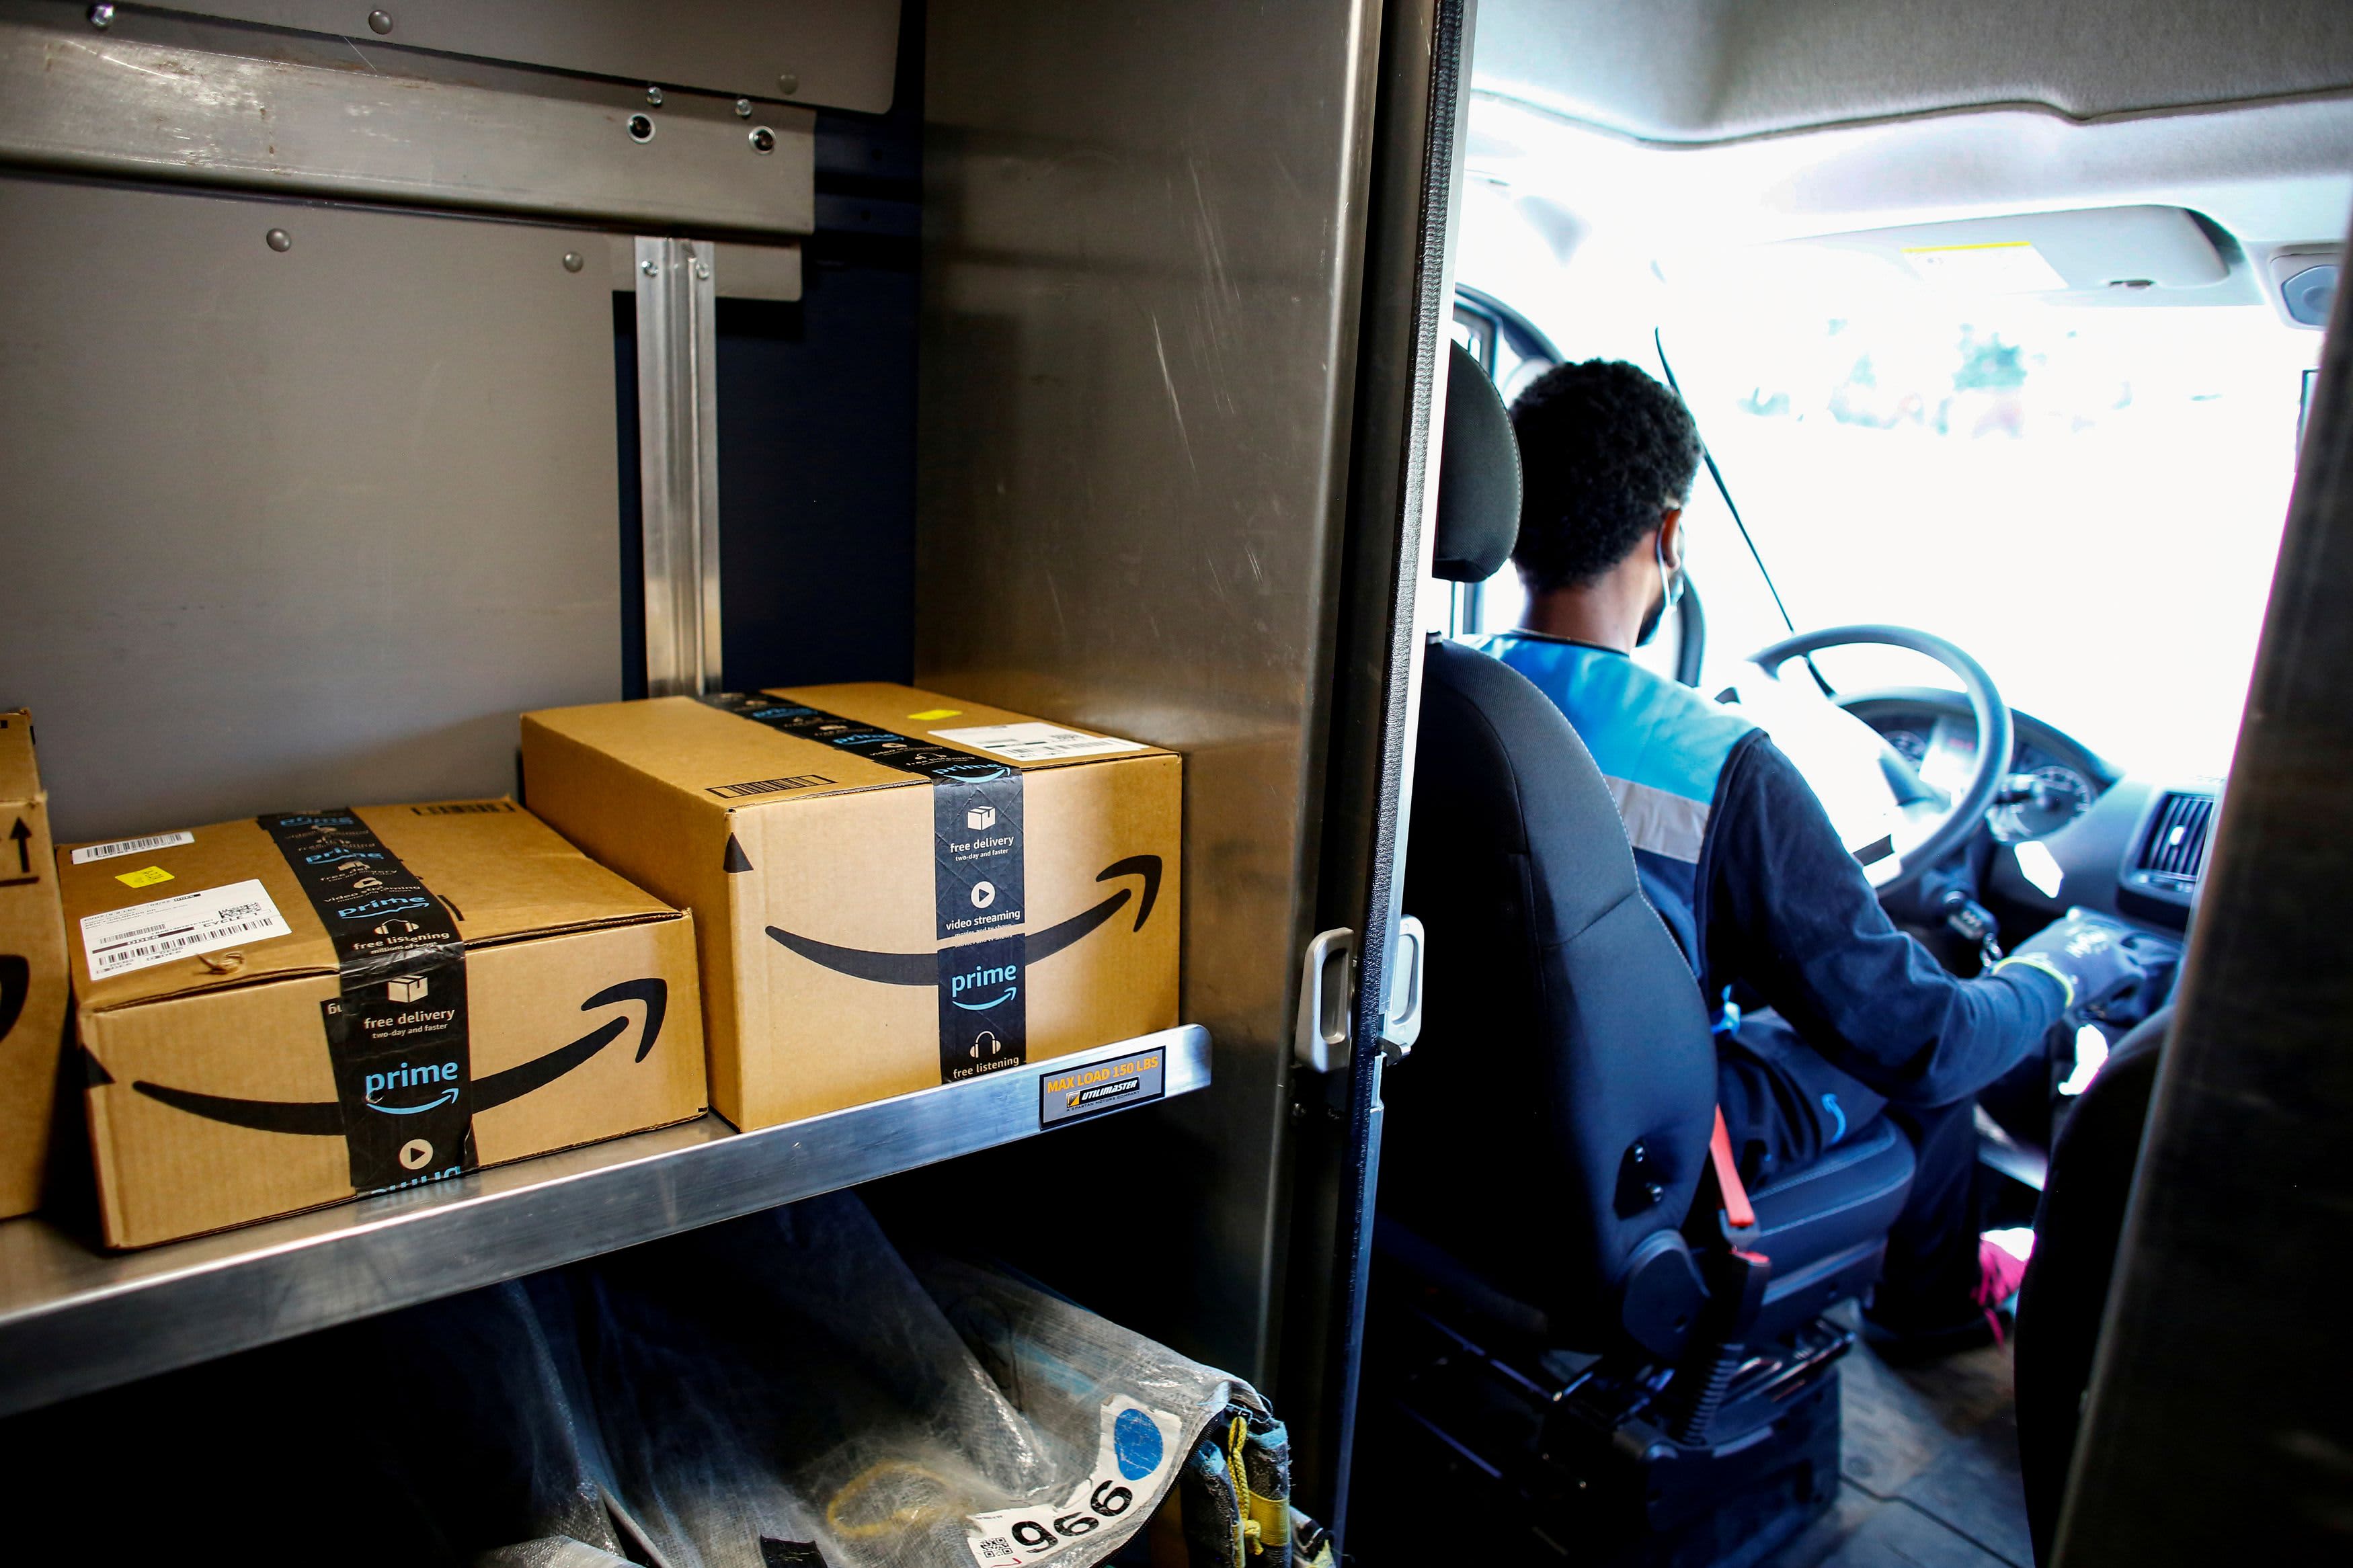 Online delivery costs are expected to increase further in the pandemic